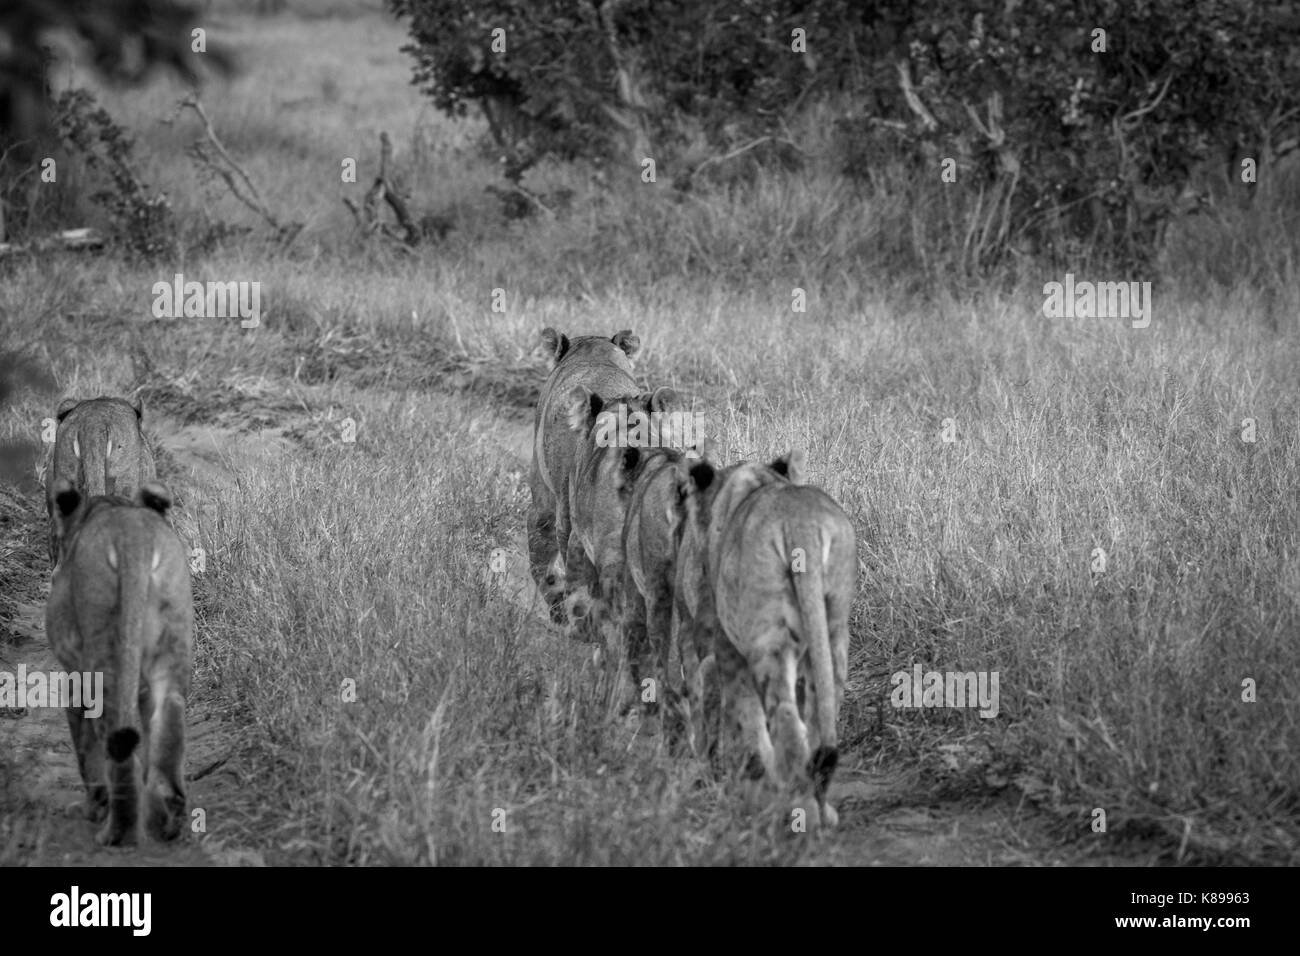 Pride of Lions walking away from the camera in black and white in the ...